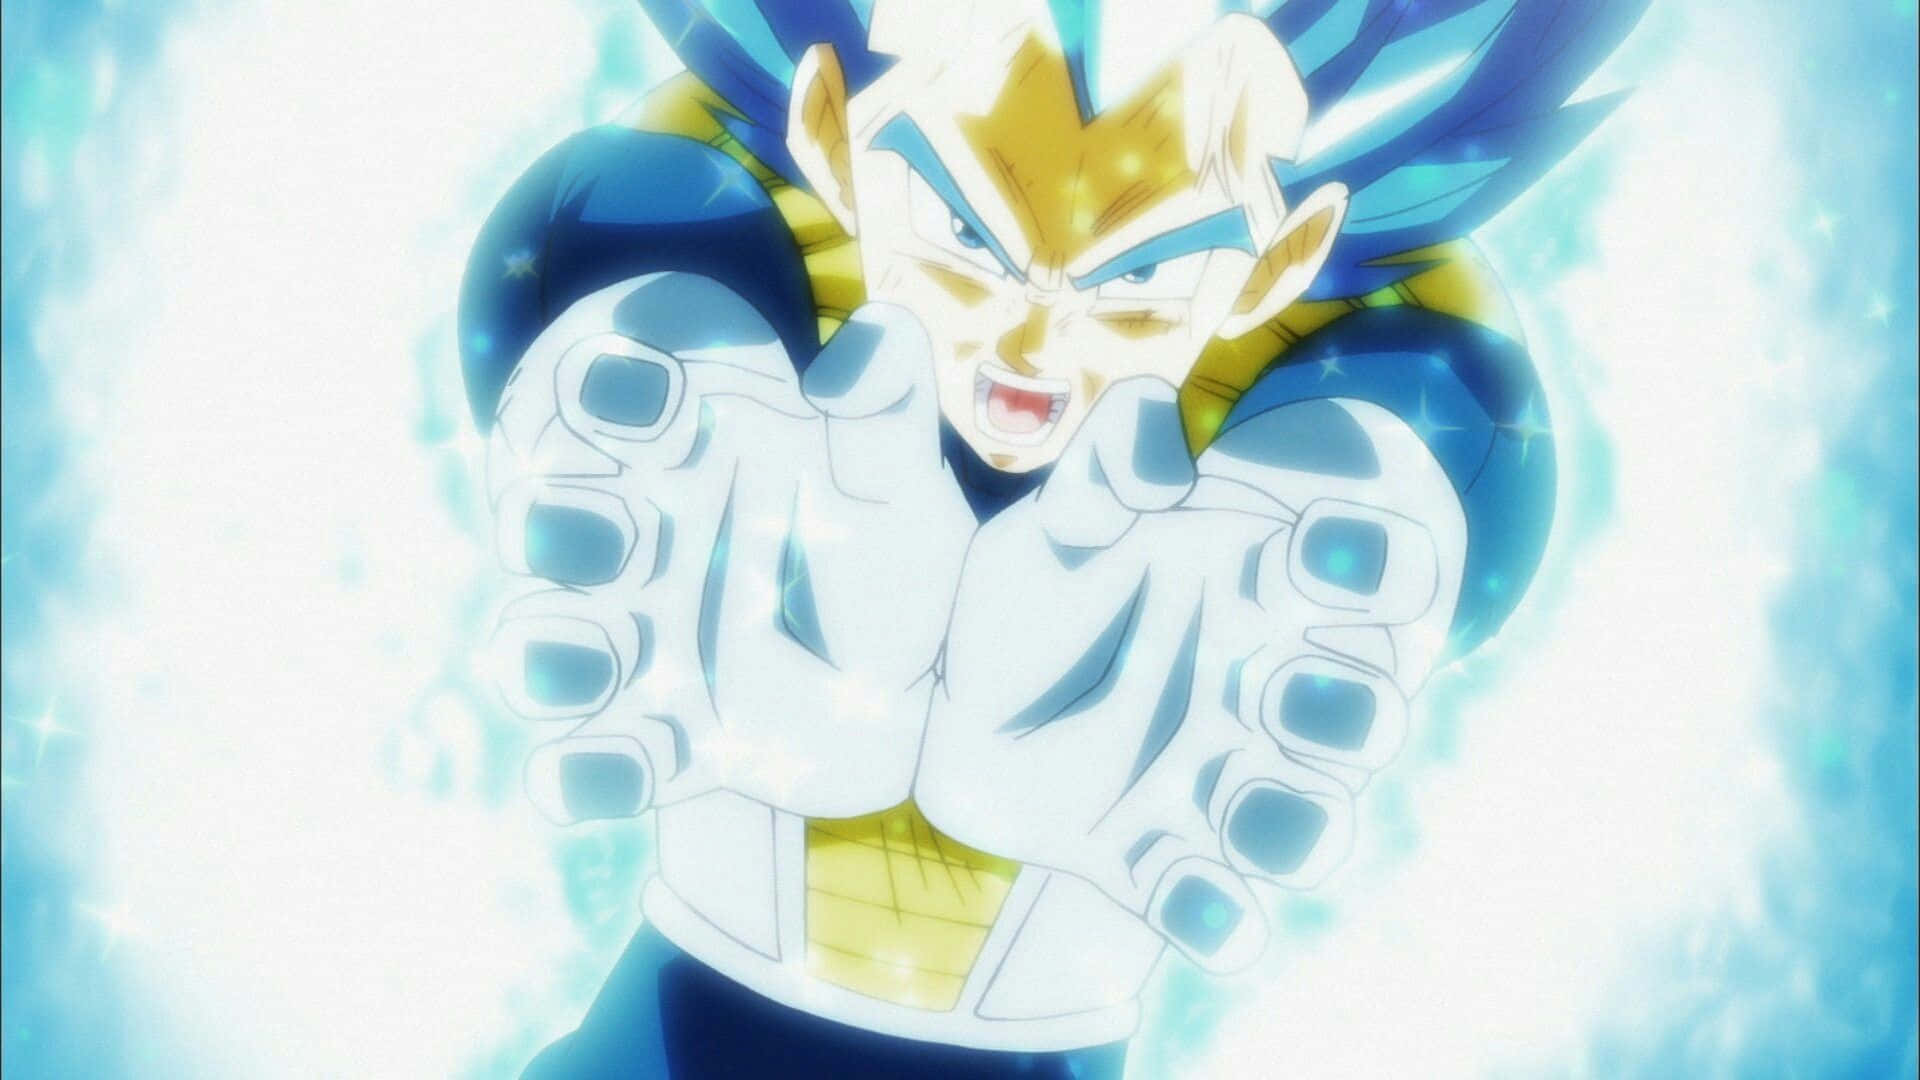 Vegeta unleashes his most powerful attack - the Final Flash Wallpaper